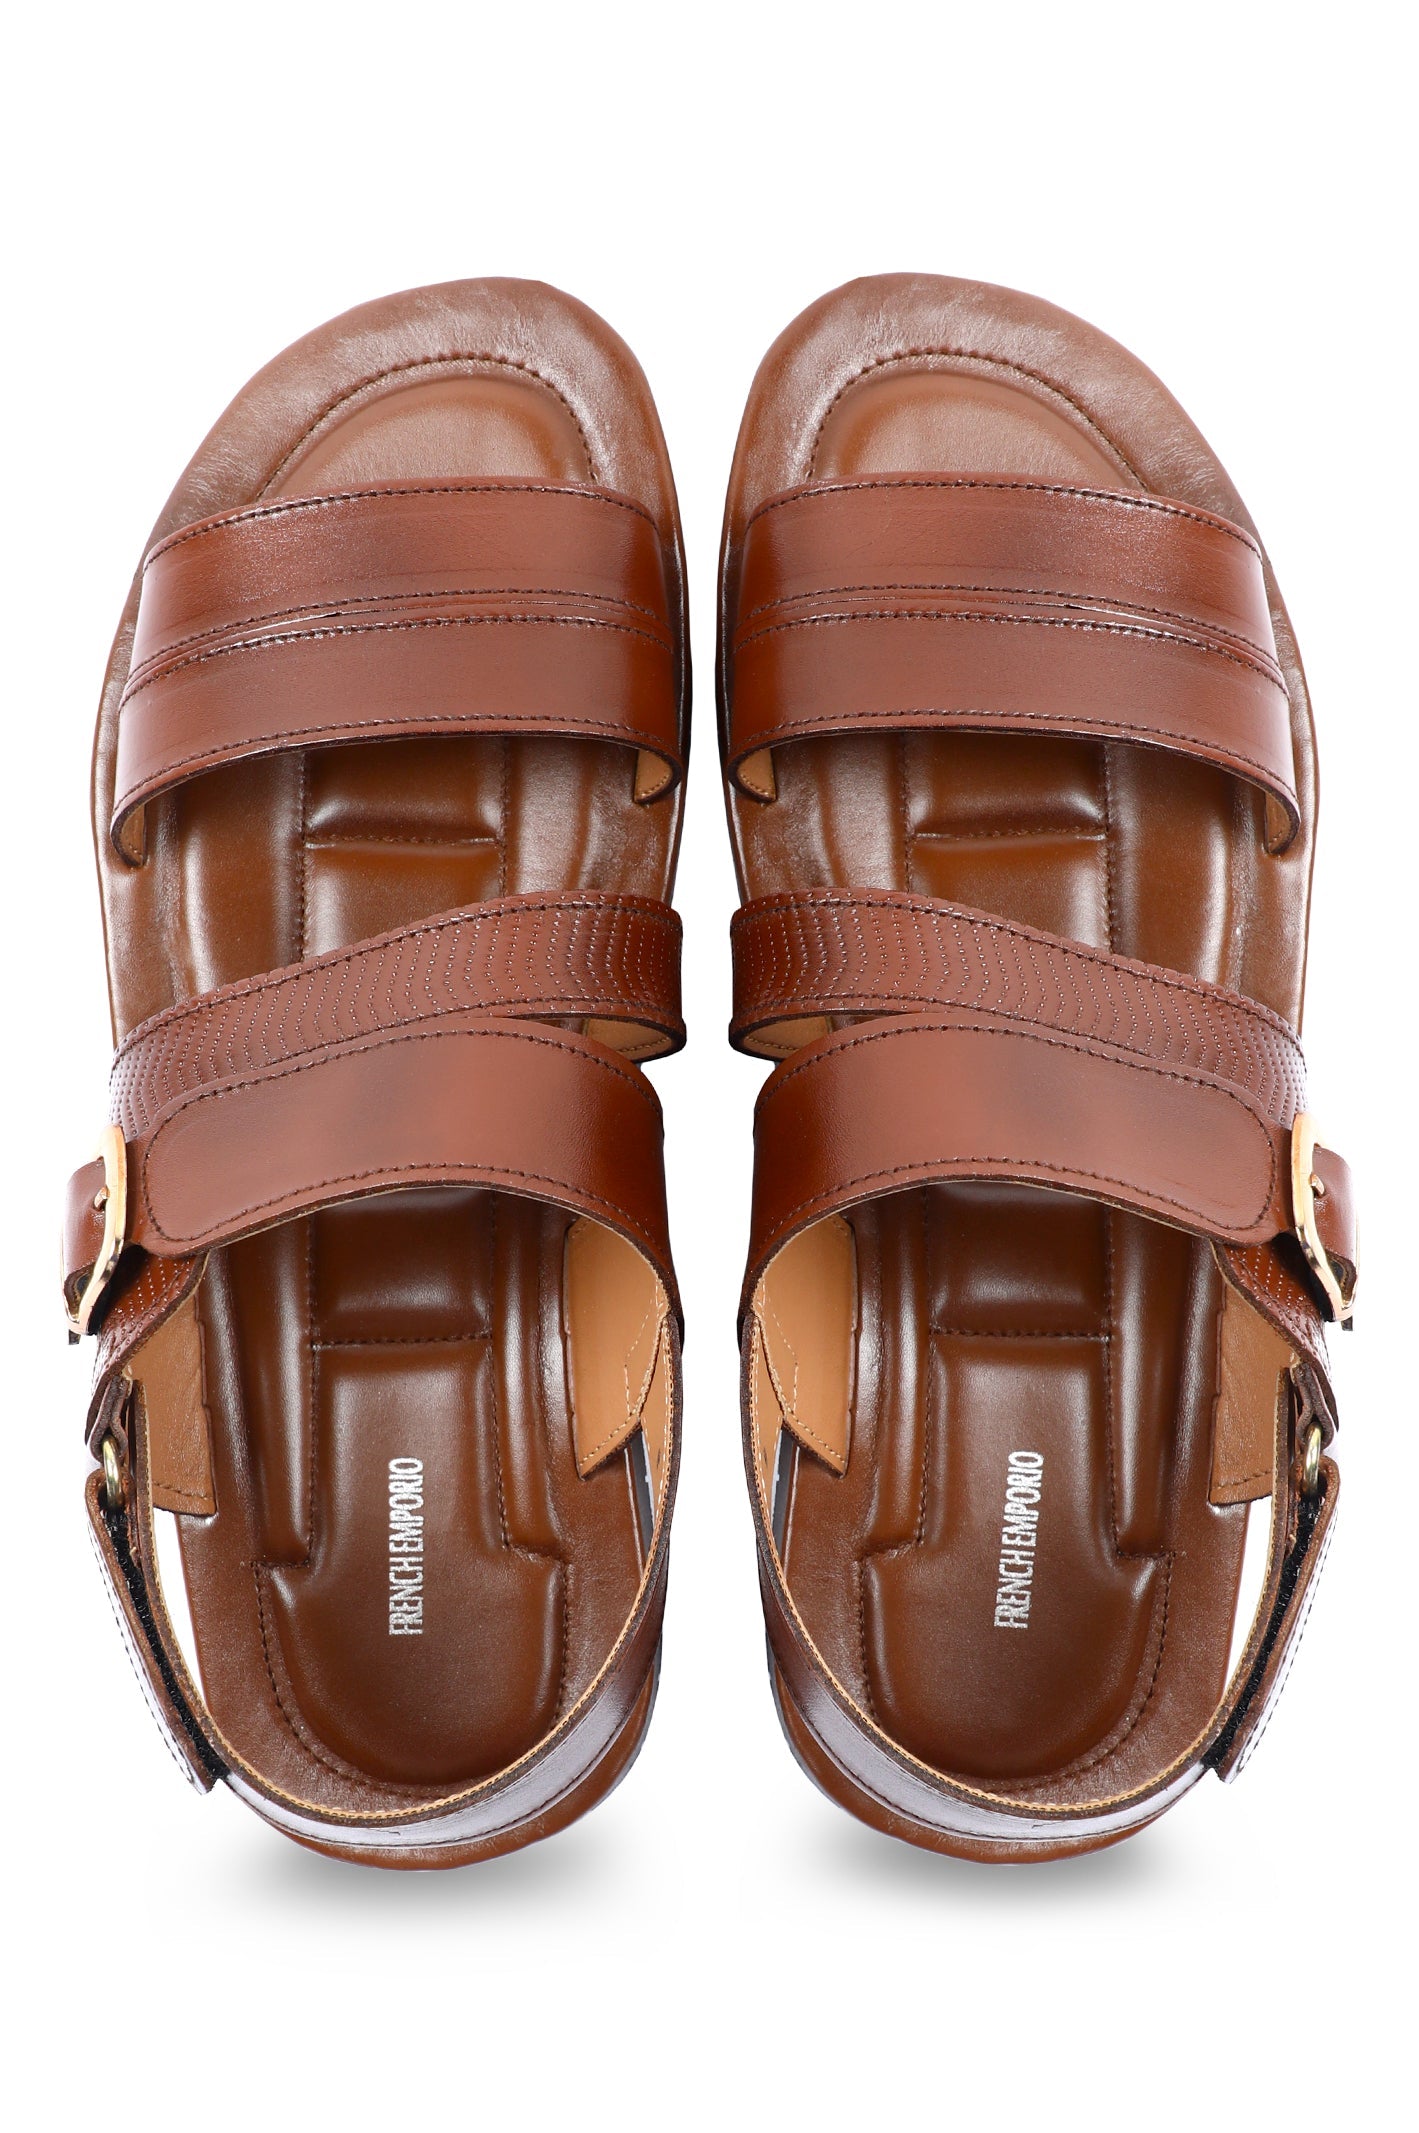 French Emporio Men Sandals SKU: SLD-0031-BROWN - Diners